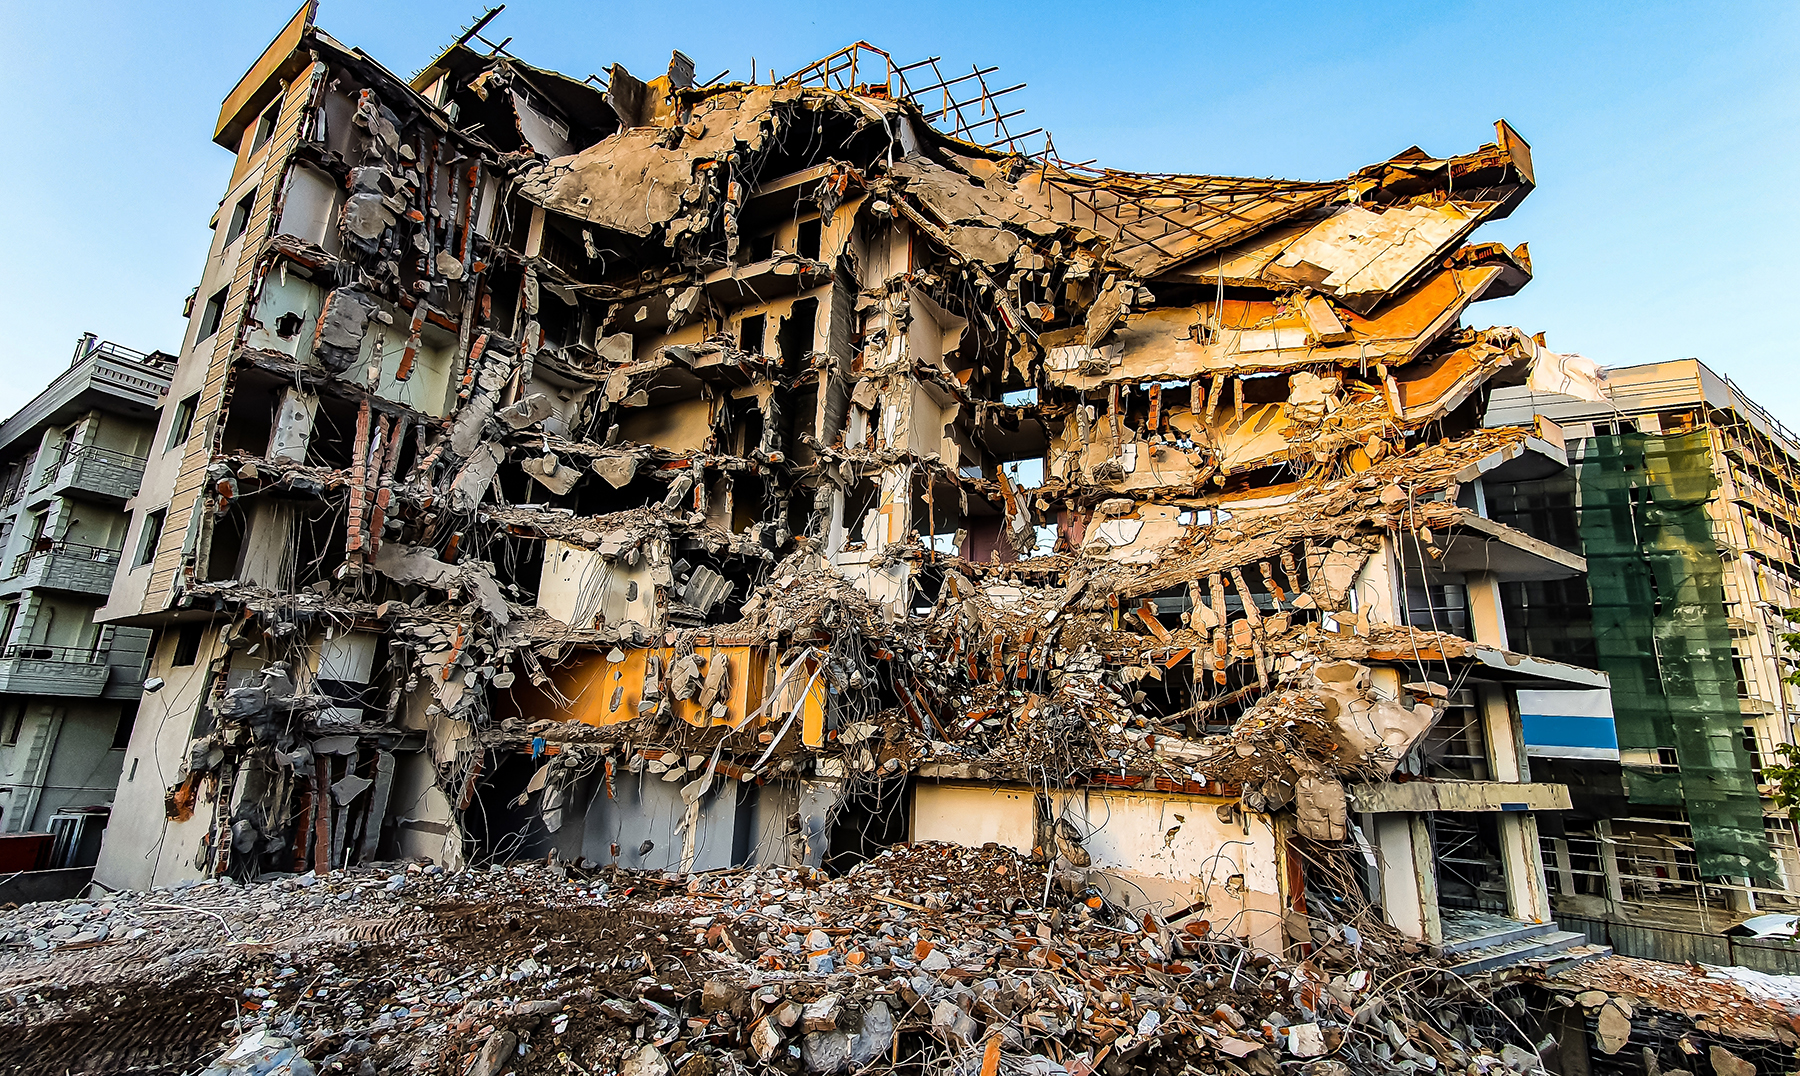 In many apartment buildings, like this one in Kahramanmaraş, the reinforced-concrete structure was not adequate in the face of the earthquake’s seismic forces. (Image courtesy twintyre/Shutterstock)